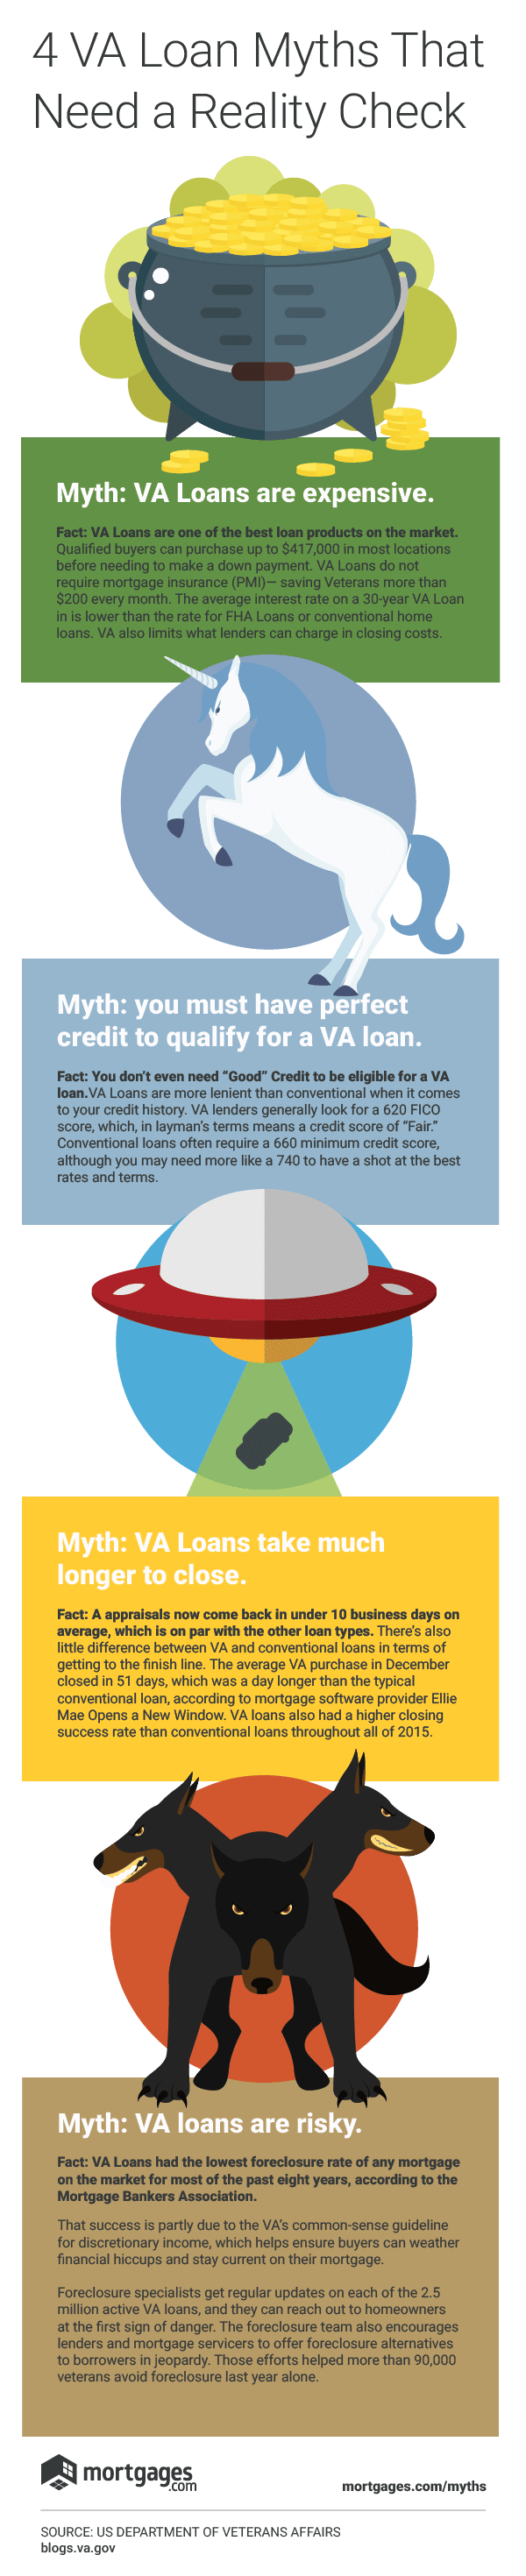 D0n't be misled by these VA Loan Myths